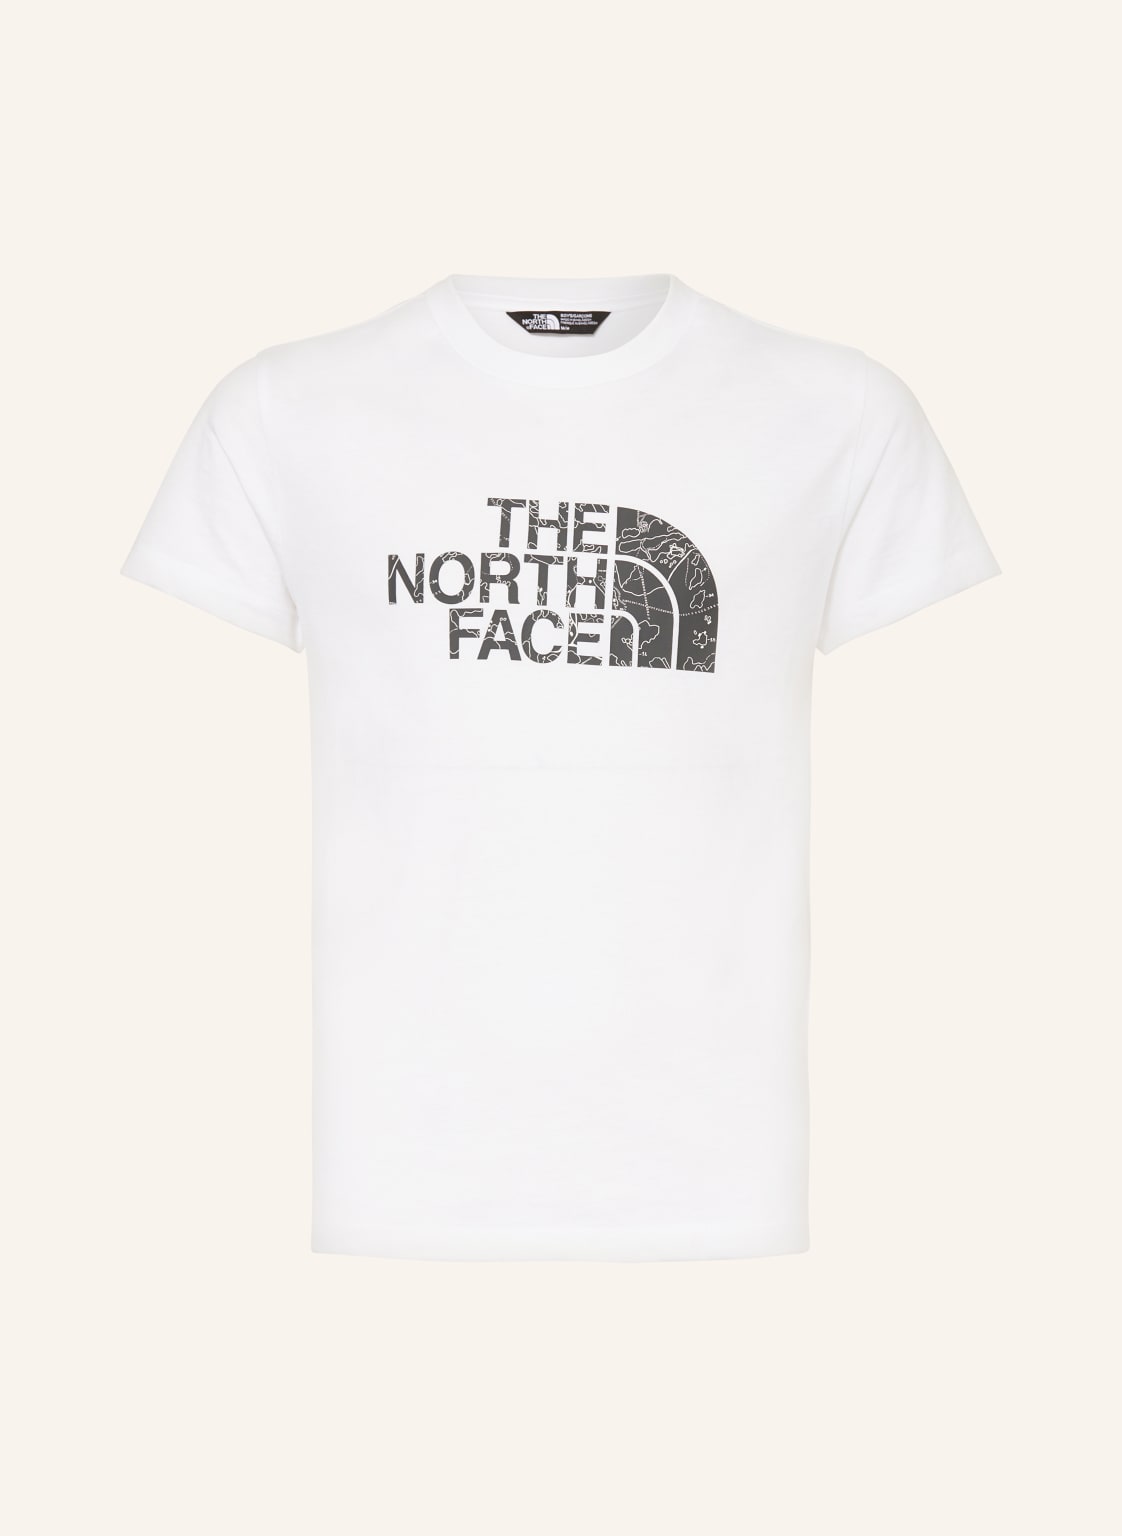 The North Face T-Shirt weiss von The North Face